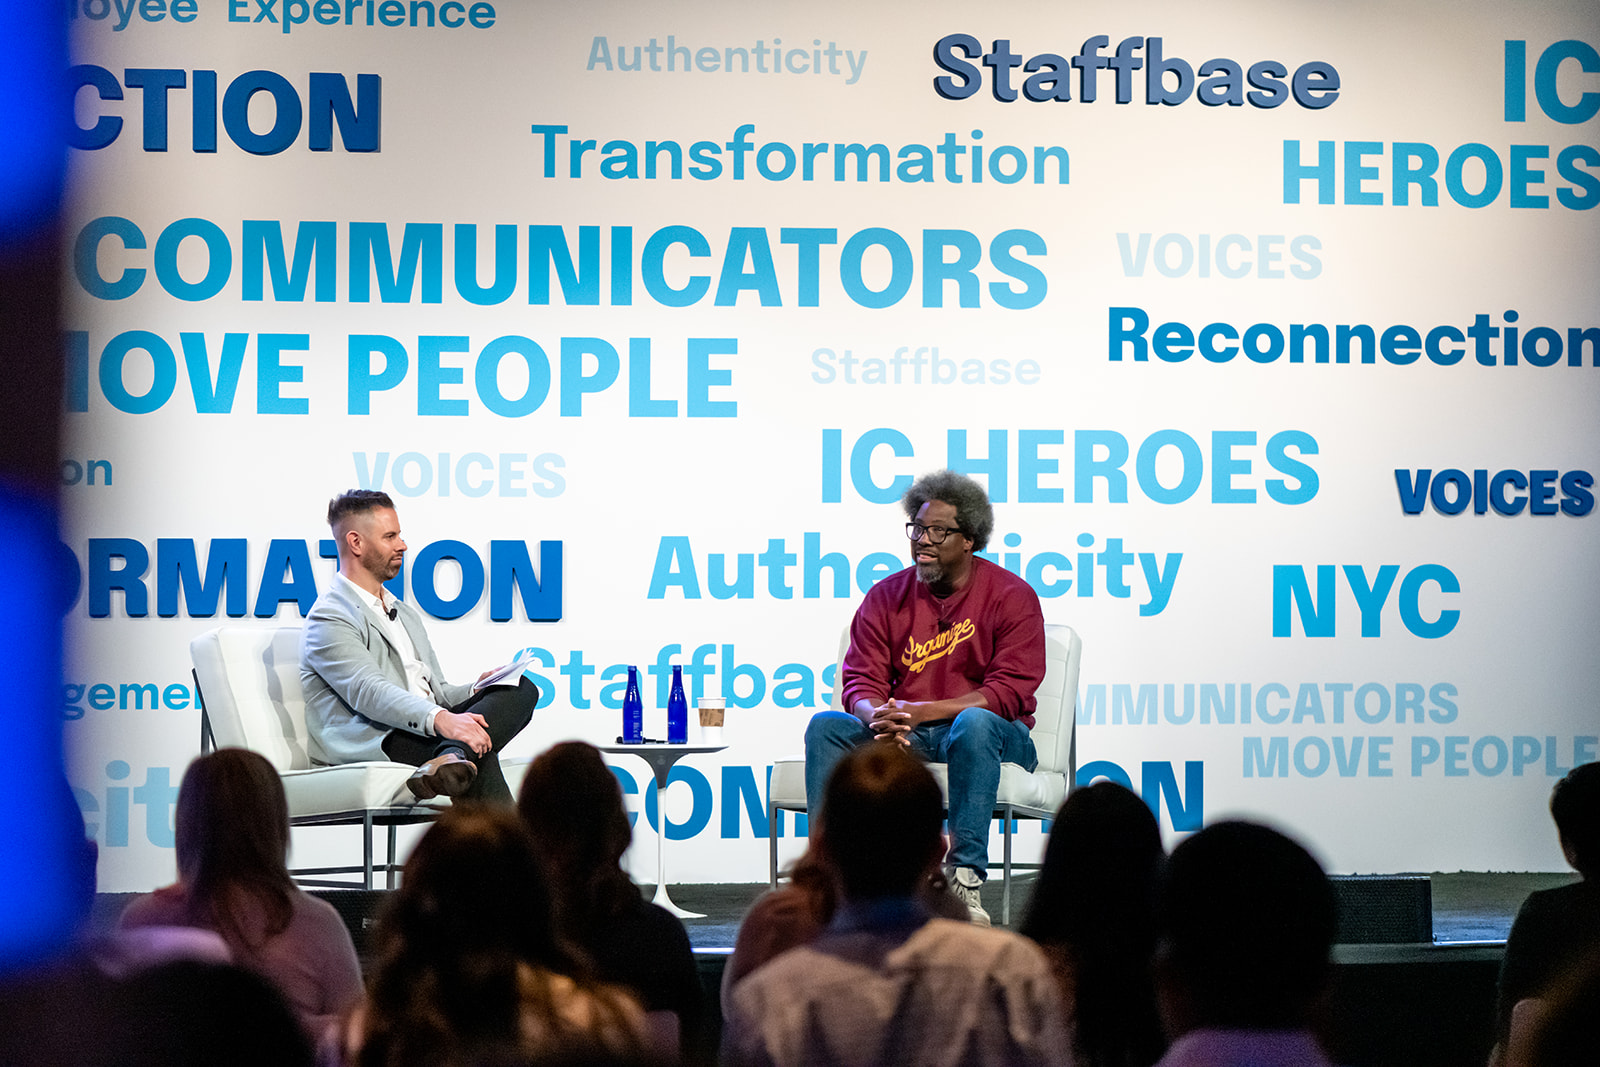 Comedian, author, and documentary producer W. Kamau Bell sits on stage with VOICES conference host Adam Brayford. They are on stage with words like "transformation" and "reconnection" and phrases like "communicators move people" in blue text behind them on a white background. We see the backs of the audiences' heads listening to Kamau and Adam.